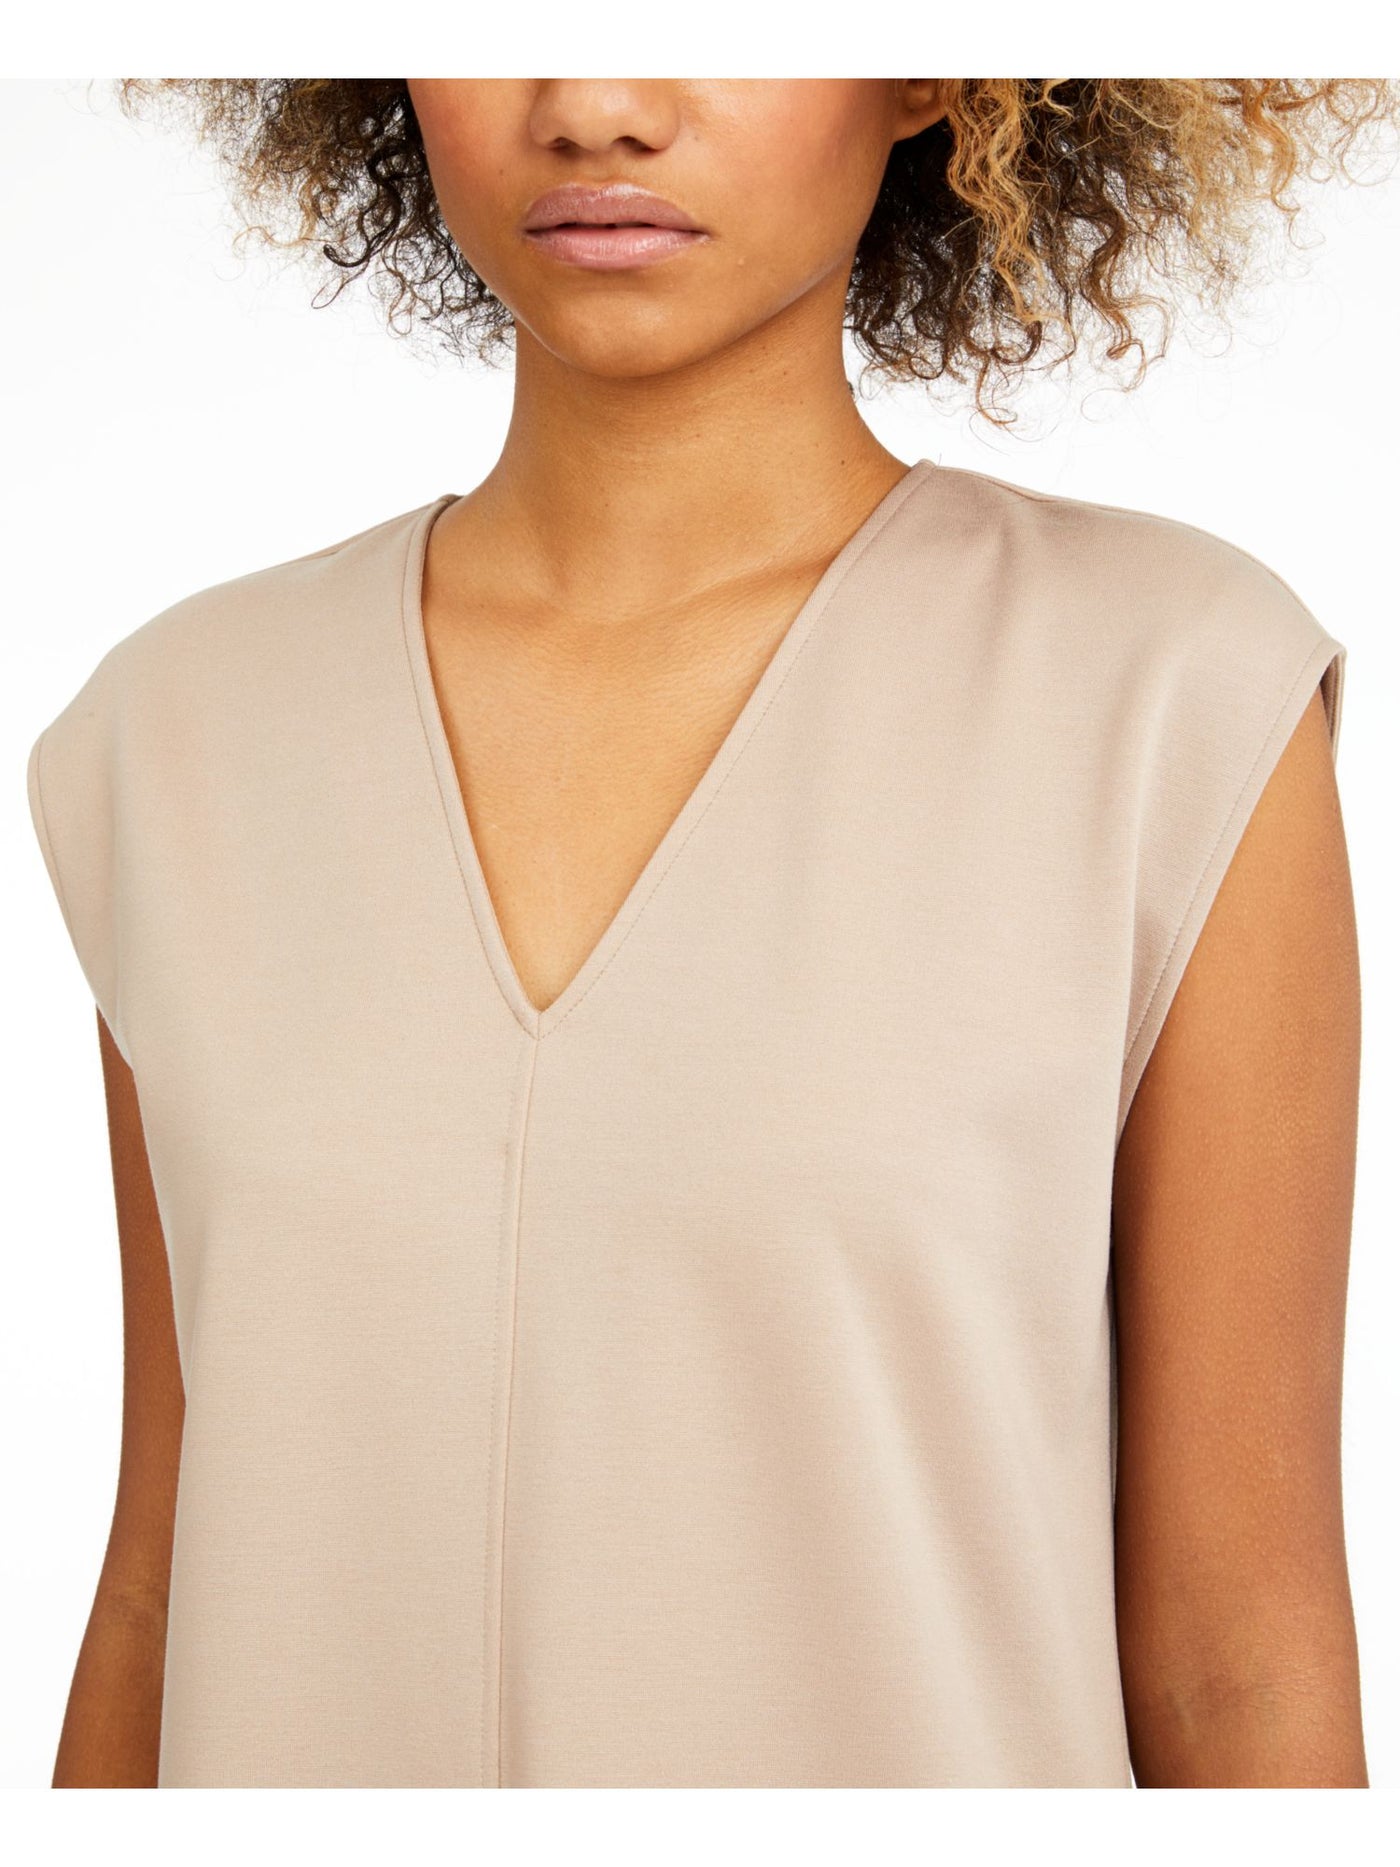 EILEEN FISHER Womens Beige Stretch Cap Sleeve V Neck Above The Knee Shift Dress M